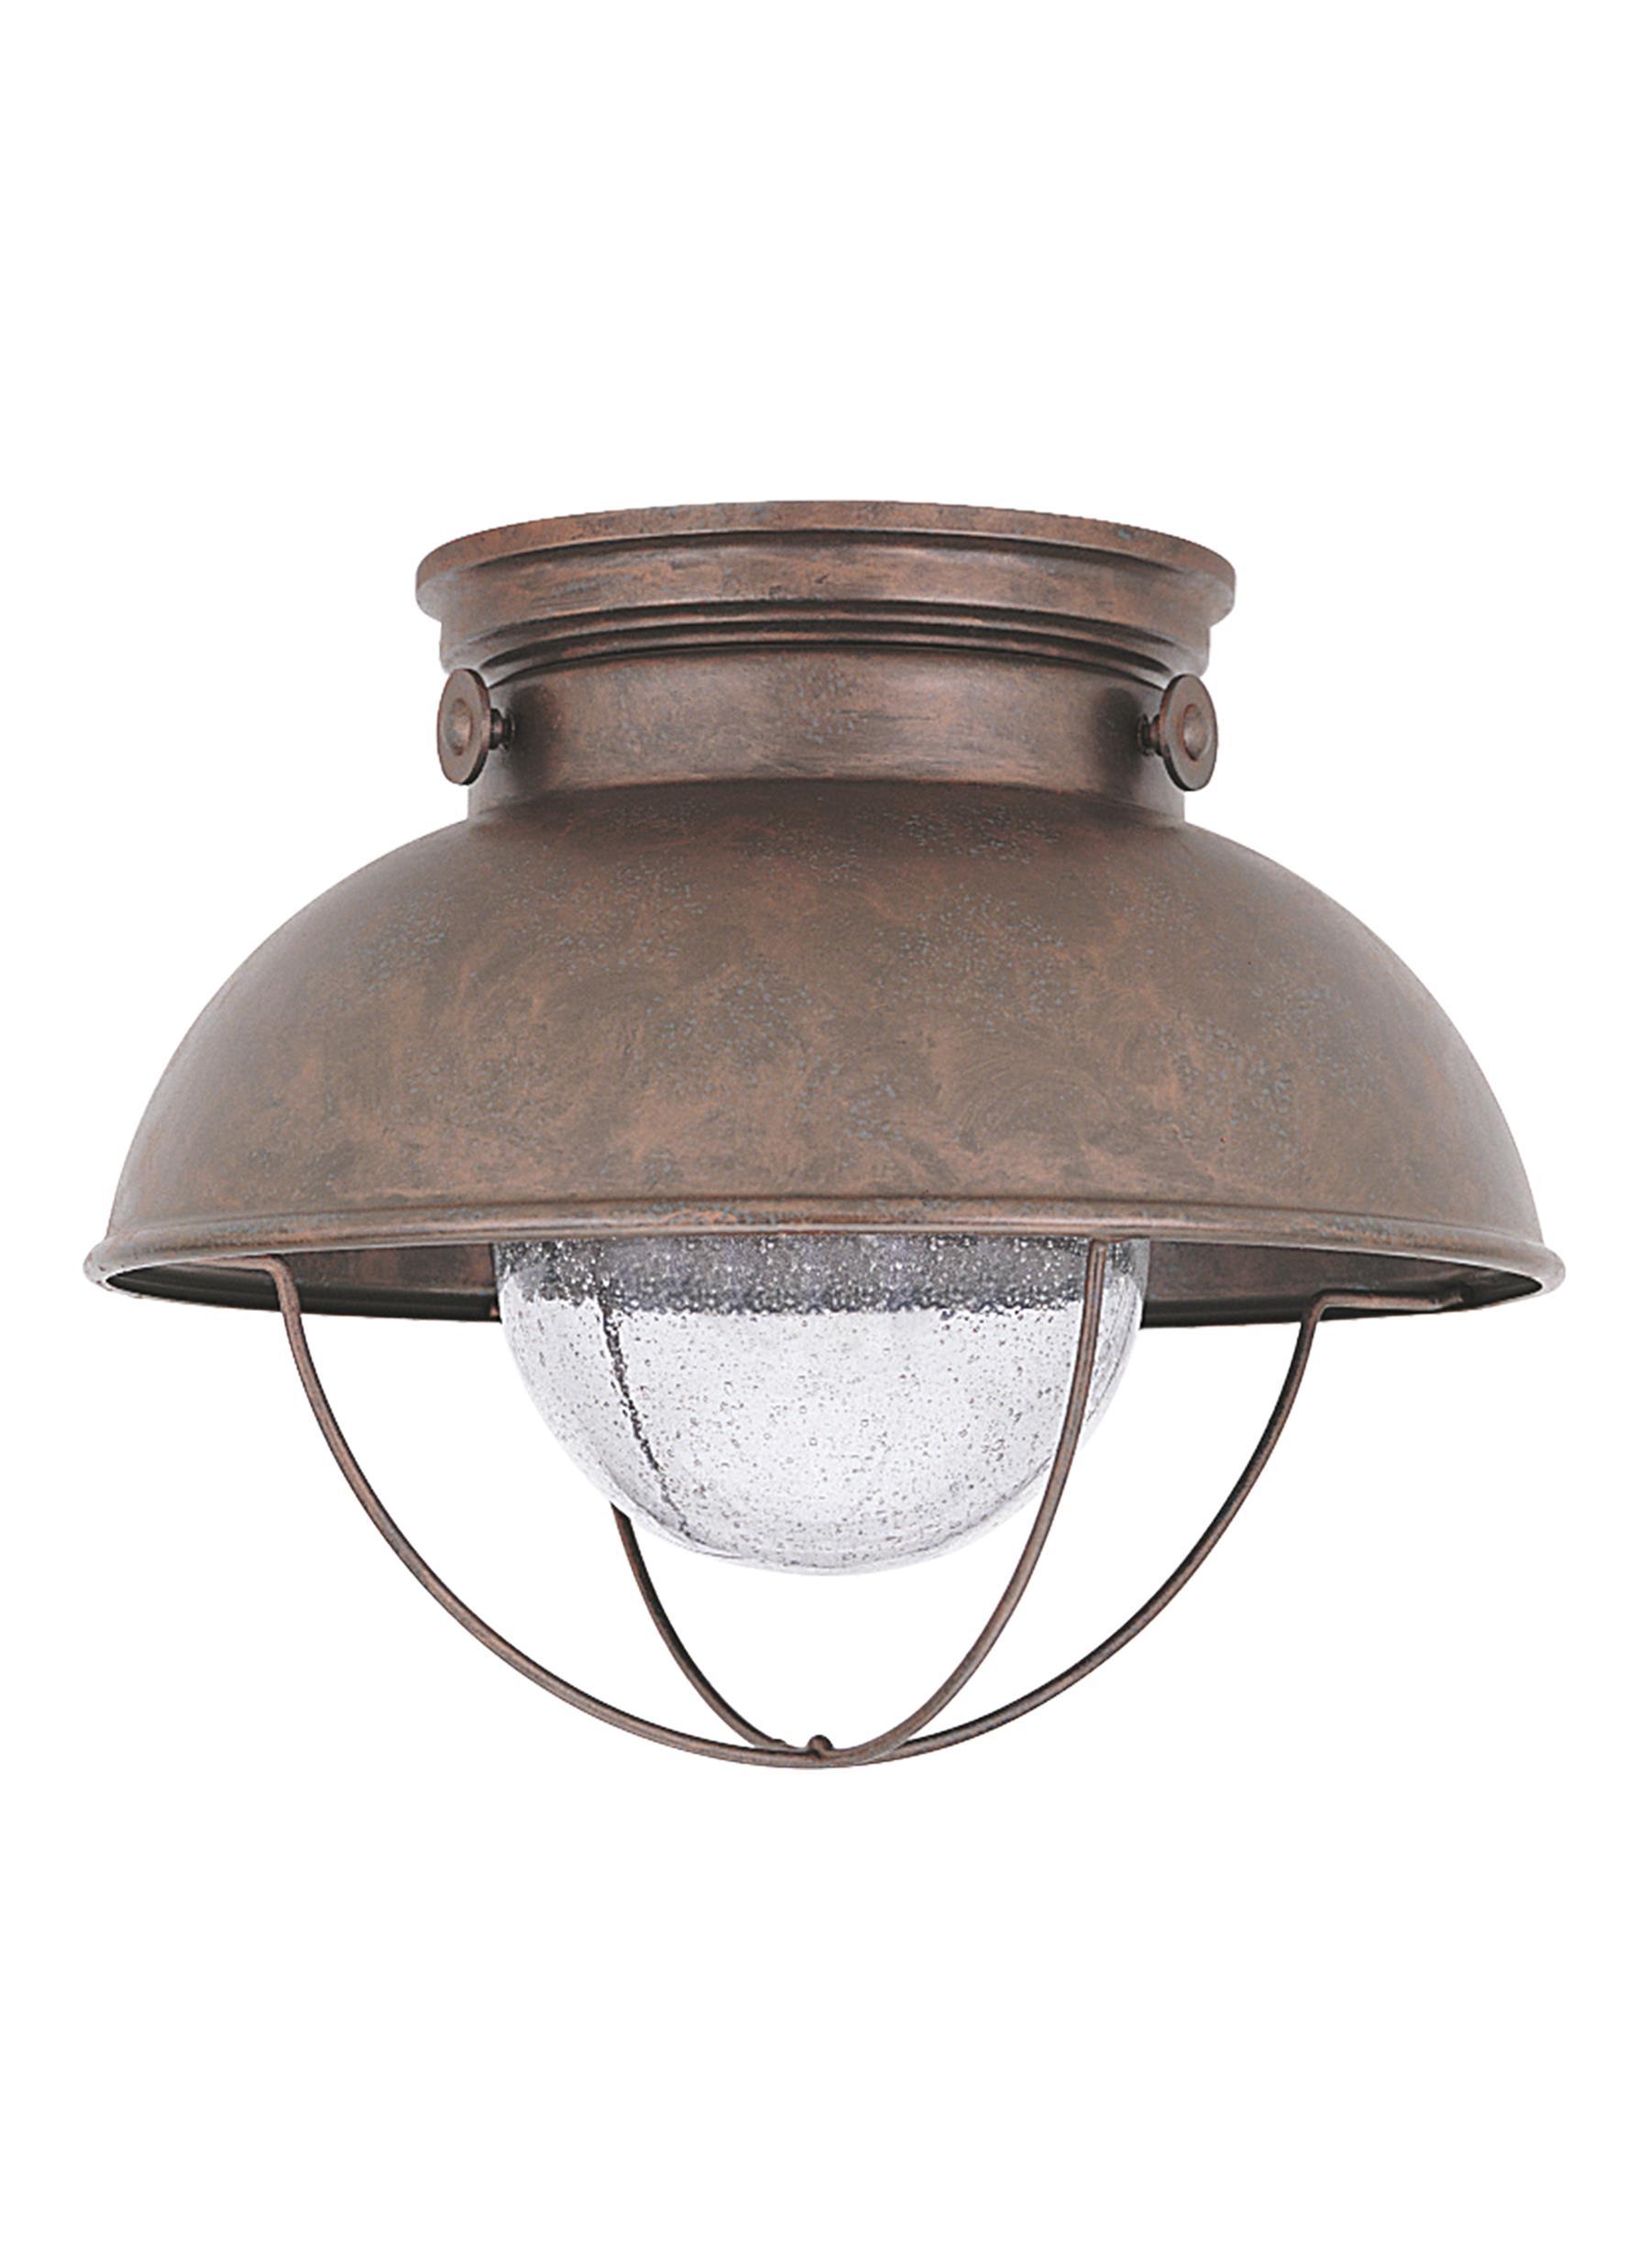 Sebring LED Outdoor Ceiling Flush Mount - Weathered Copper Outdoor Sea Gull Lighting 